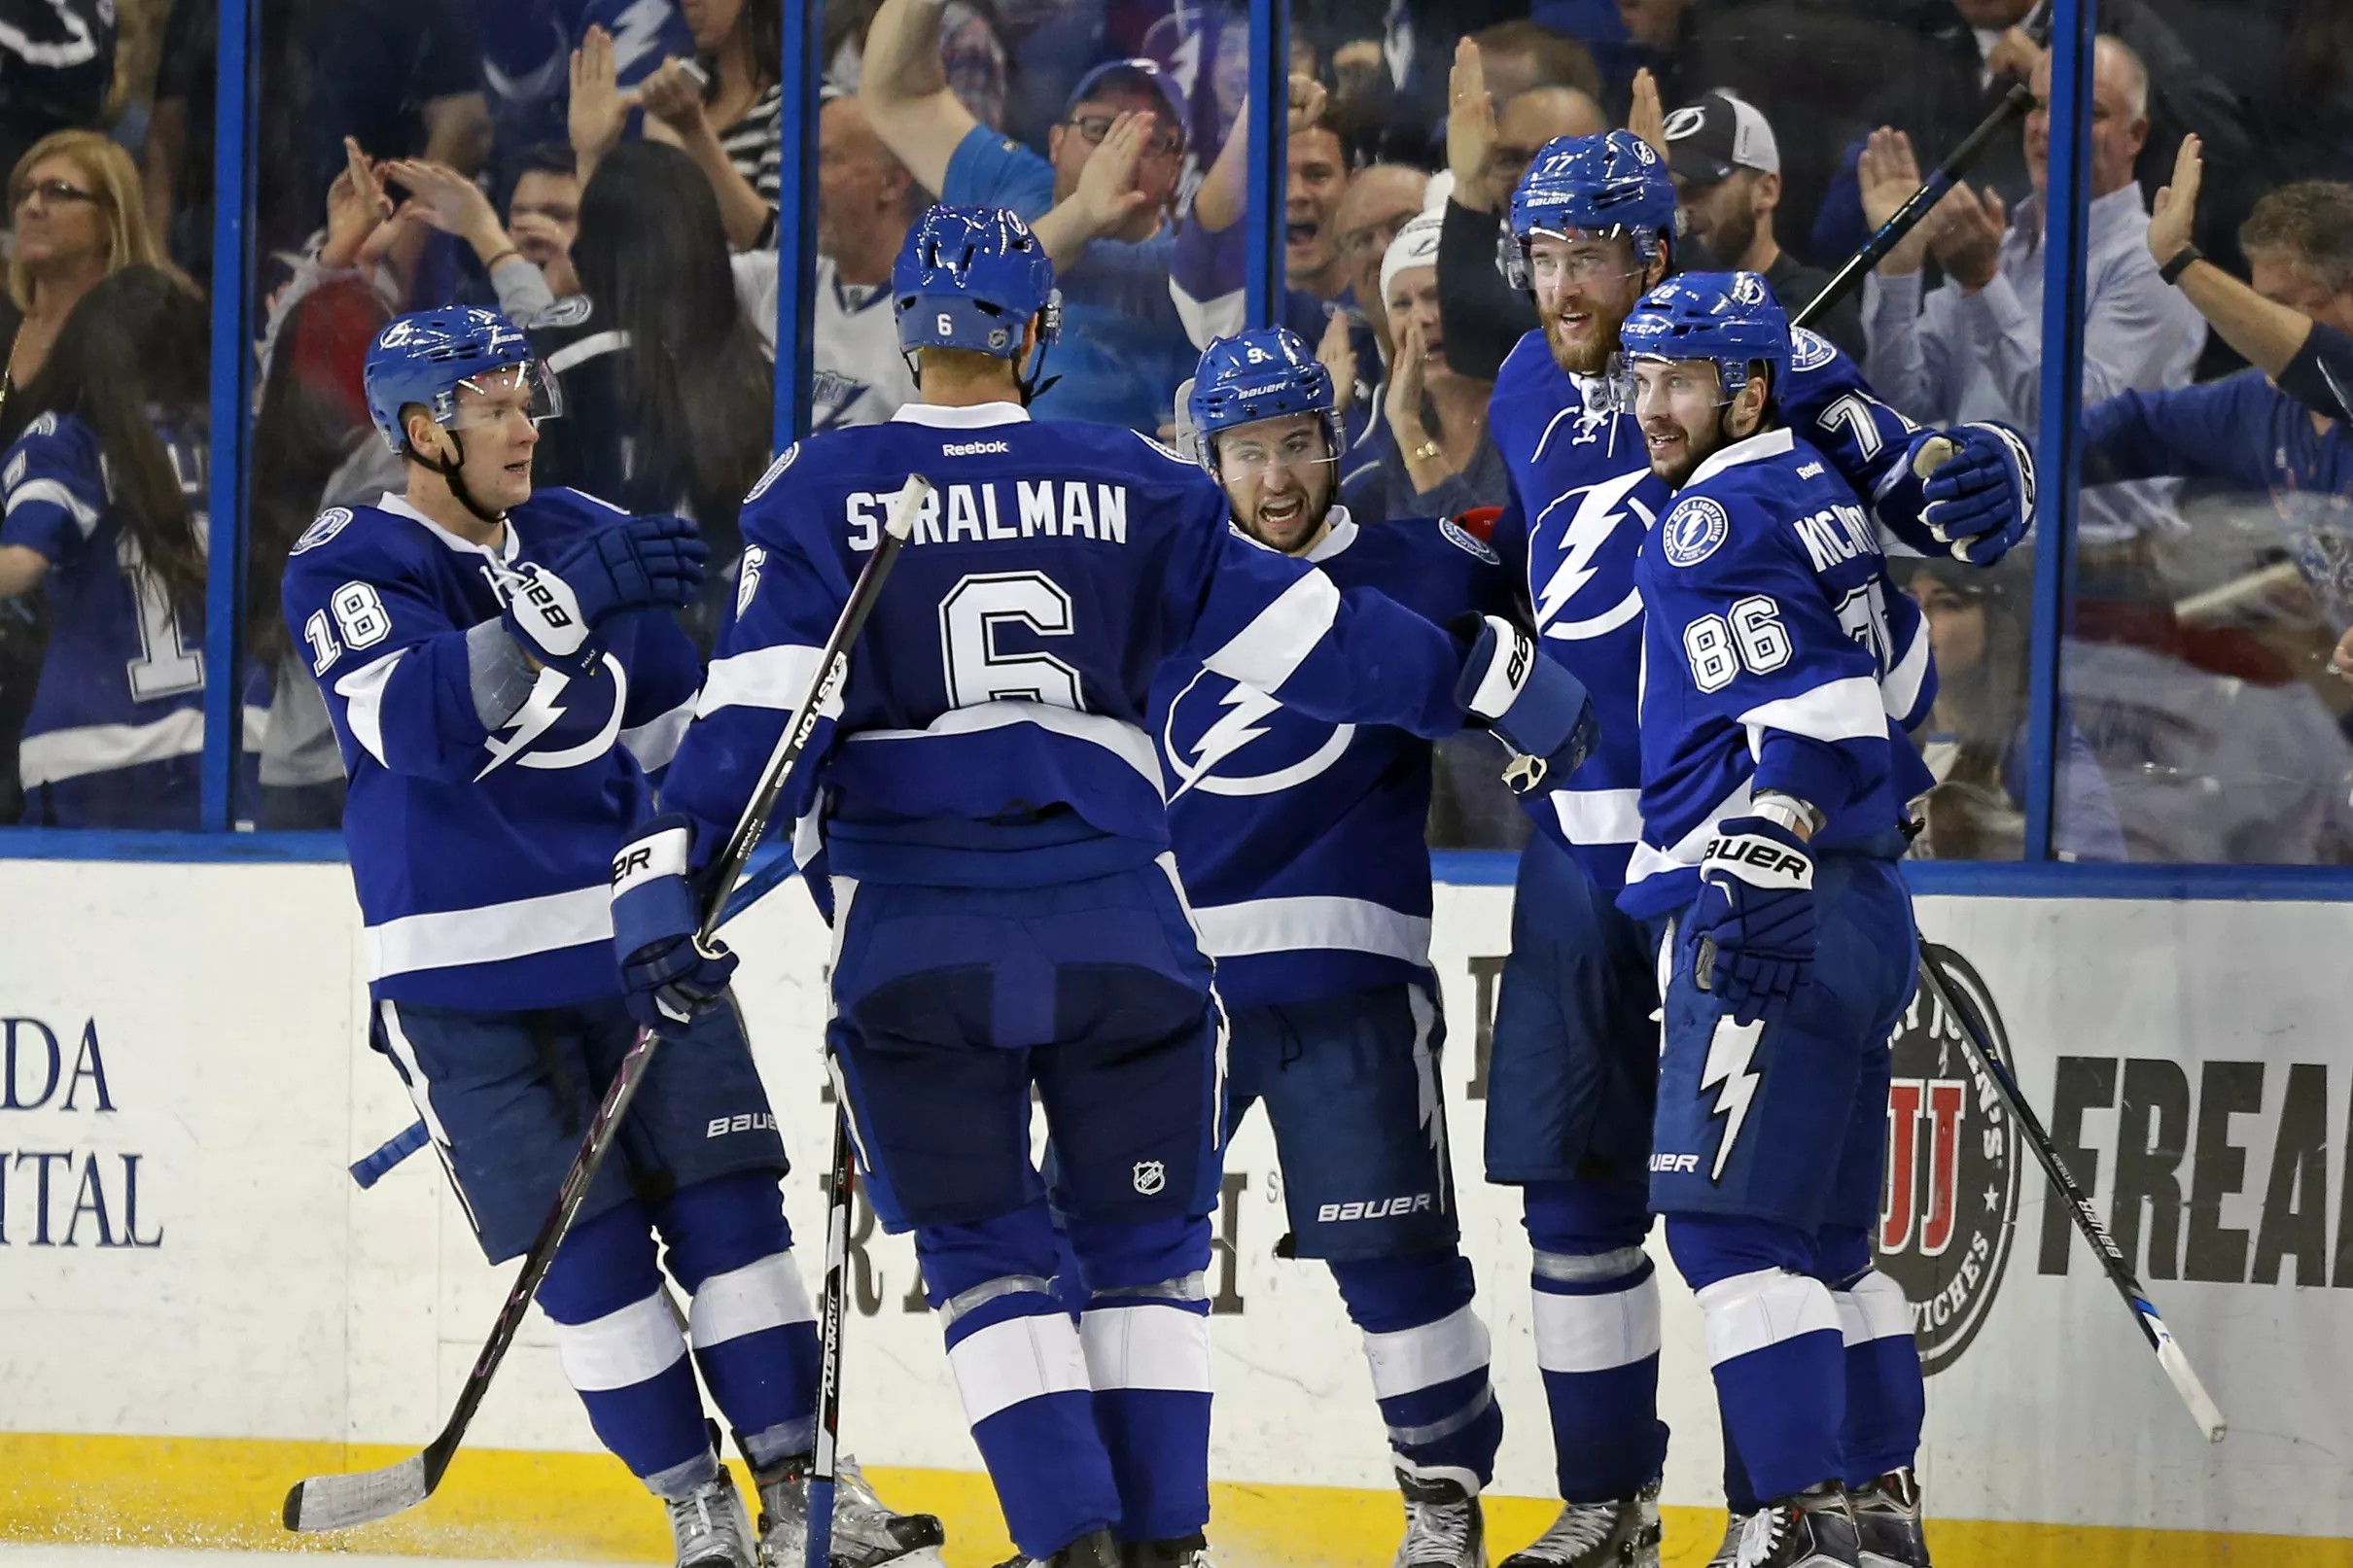 Quick Strikes: Tampa Bay Lightning single-game tickets on sale August 11